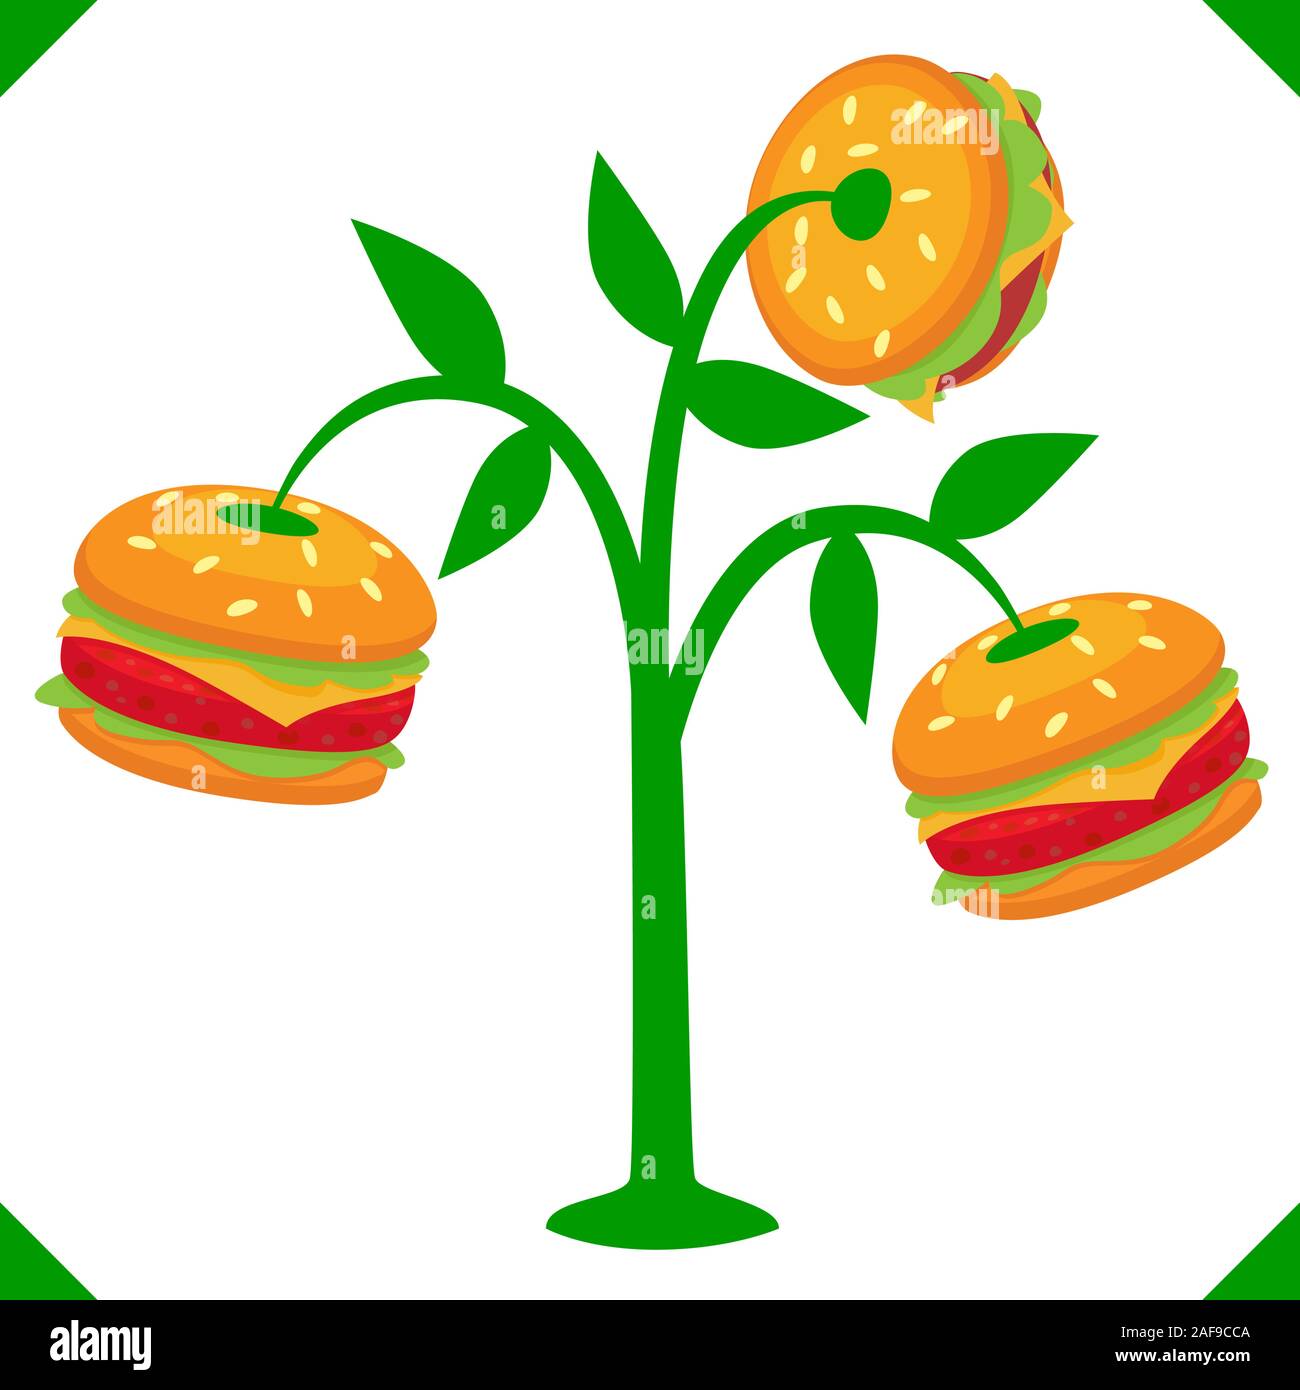 Plant based Meat with hamburger tree concept with cheese burger Stock Vector